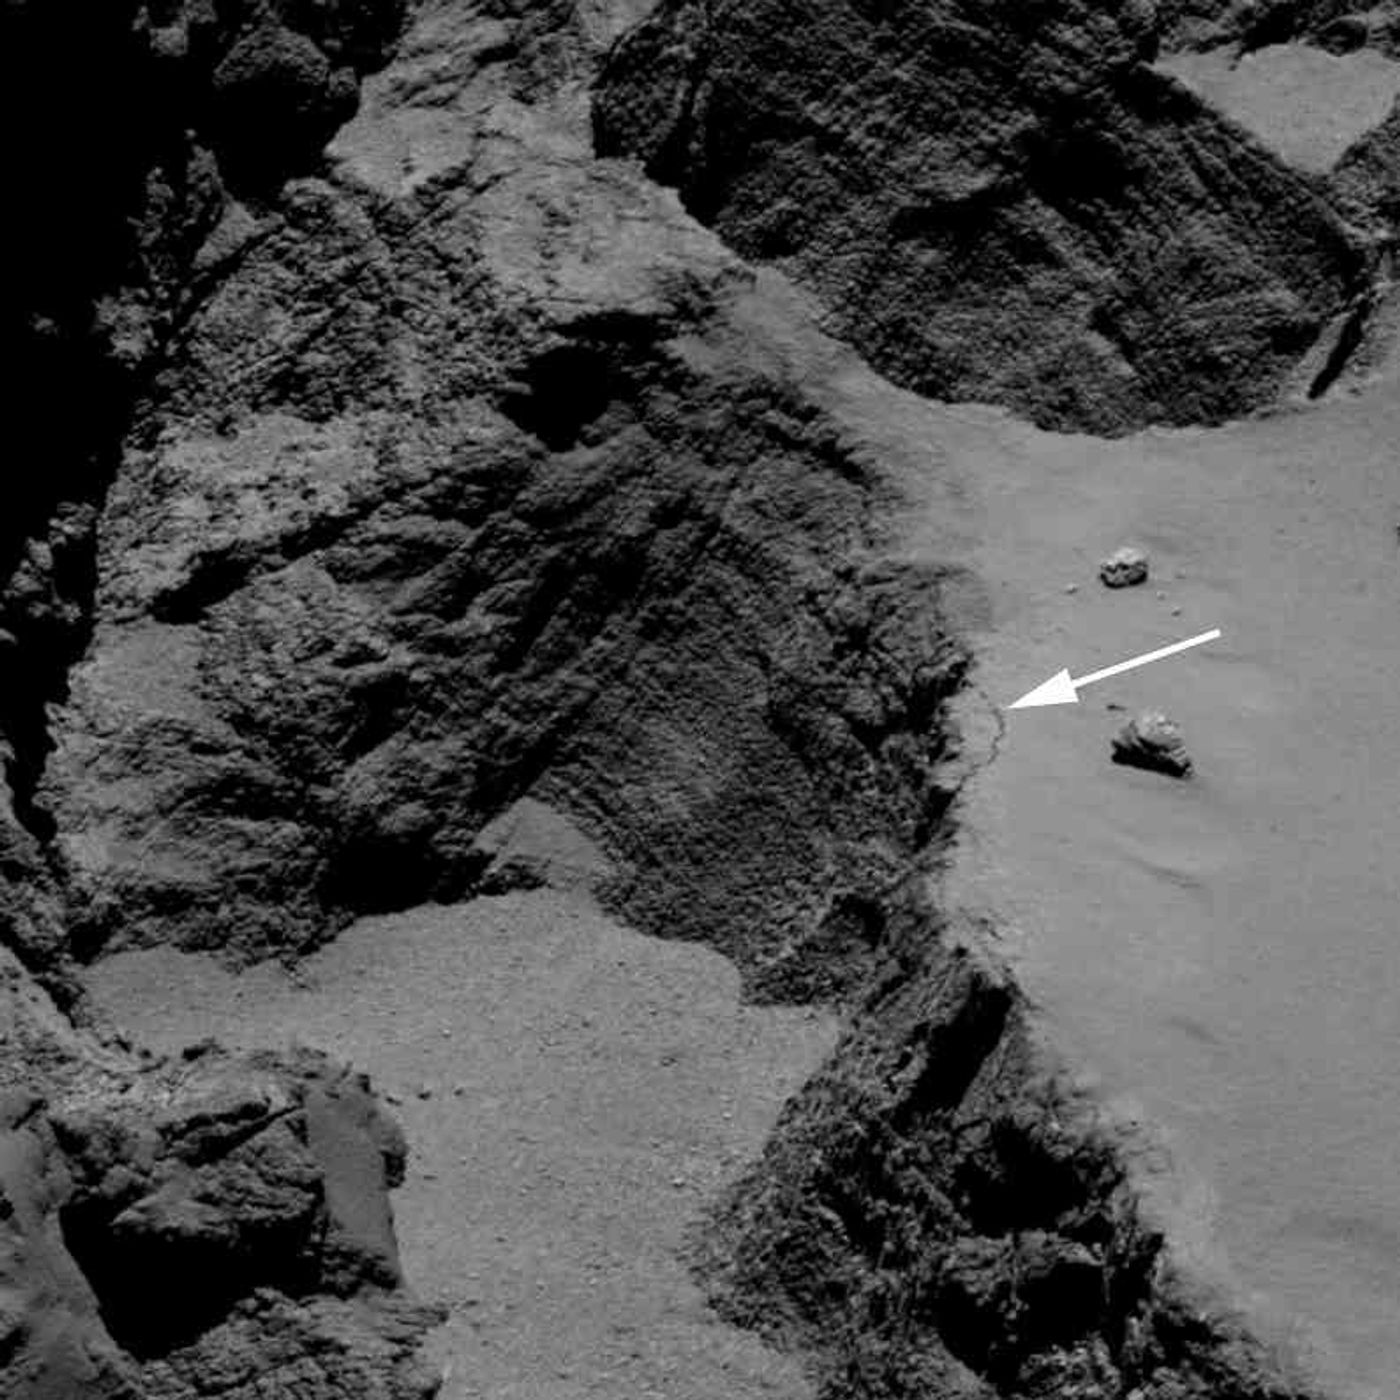 The crack that would eventually turn into a landslide on comet 67P.